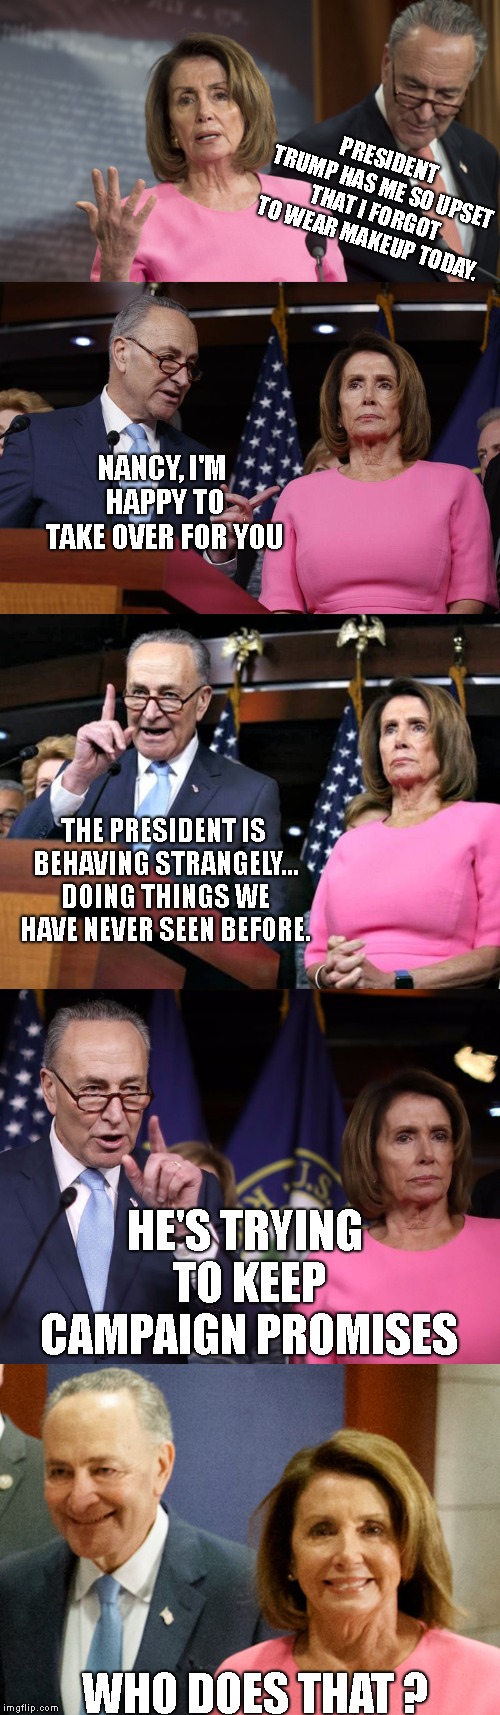 Nancy and Chuck.. Two Birds Of A Feather.. | PRESIDENT TRUMP HAS ME SO UPSET THAT I FORGOT TO WEAR MAKEUP TODAY. NANCY, I'M HAPPY TO TAKE OVER FOR YOU; THE PRESIDENT IS BEHAVING STRANGELY... DOING THINGS WE HAVE NEVER SEEN BEFORE. HE'S TRYING TO KEEP CAMPAIGN PROMISES; WHO DOES THAT ? | image tagged in nancy pelosi,chuck schumer,president donald trump,democrats keep losing,america keeps winning | made w/ Imgflip meme maker